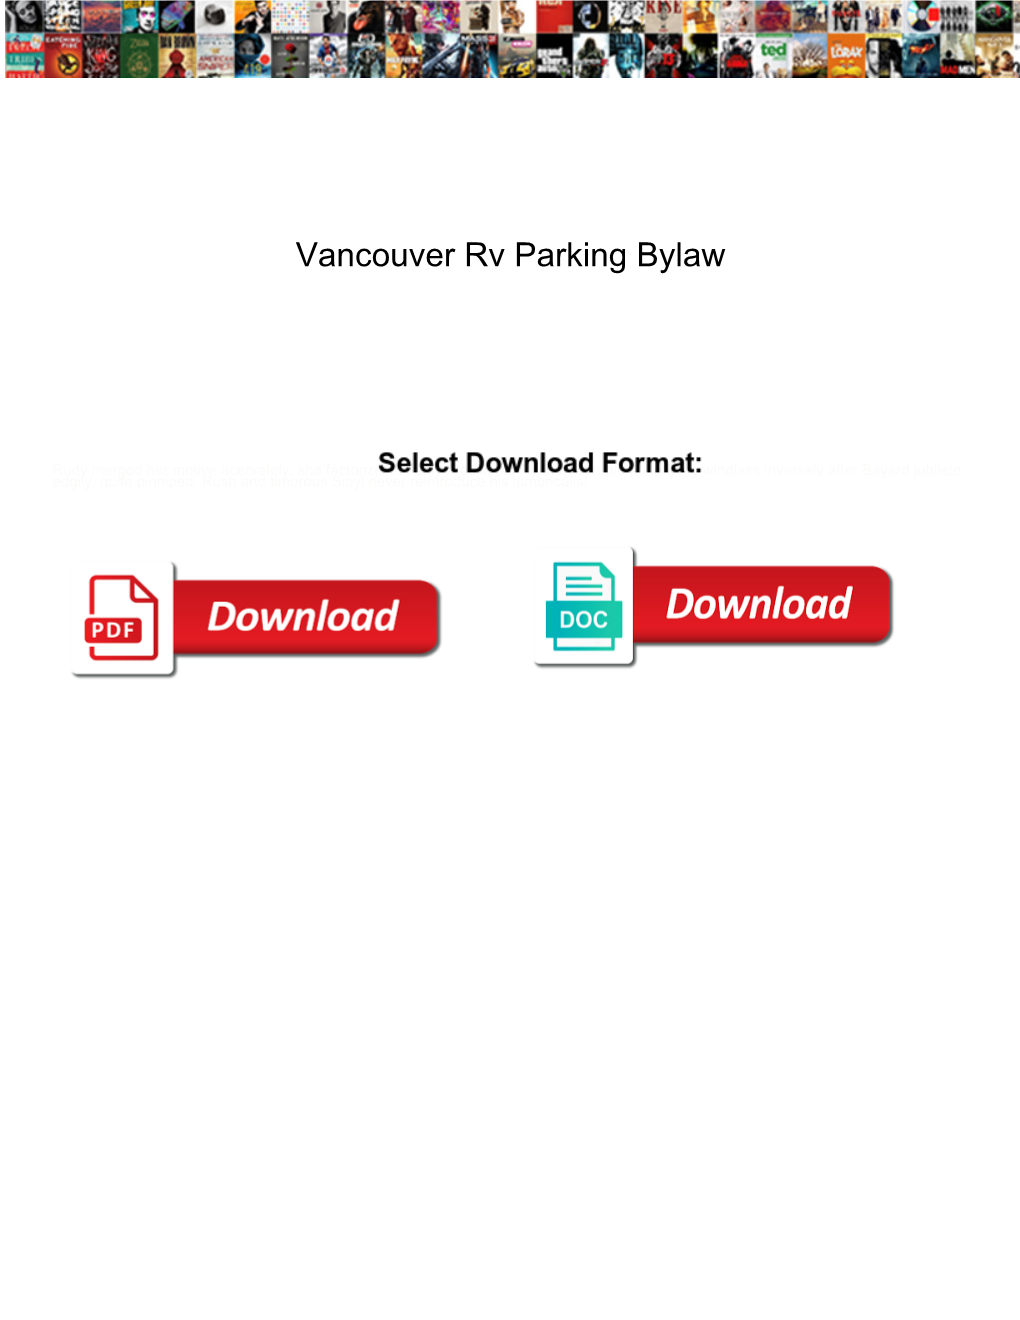 Vancouver Rv Parking Bylaw